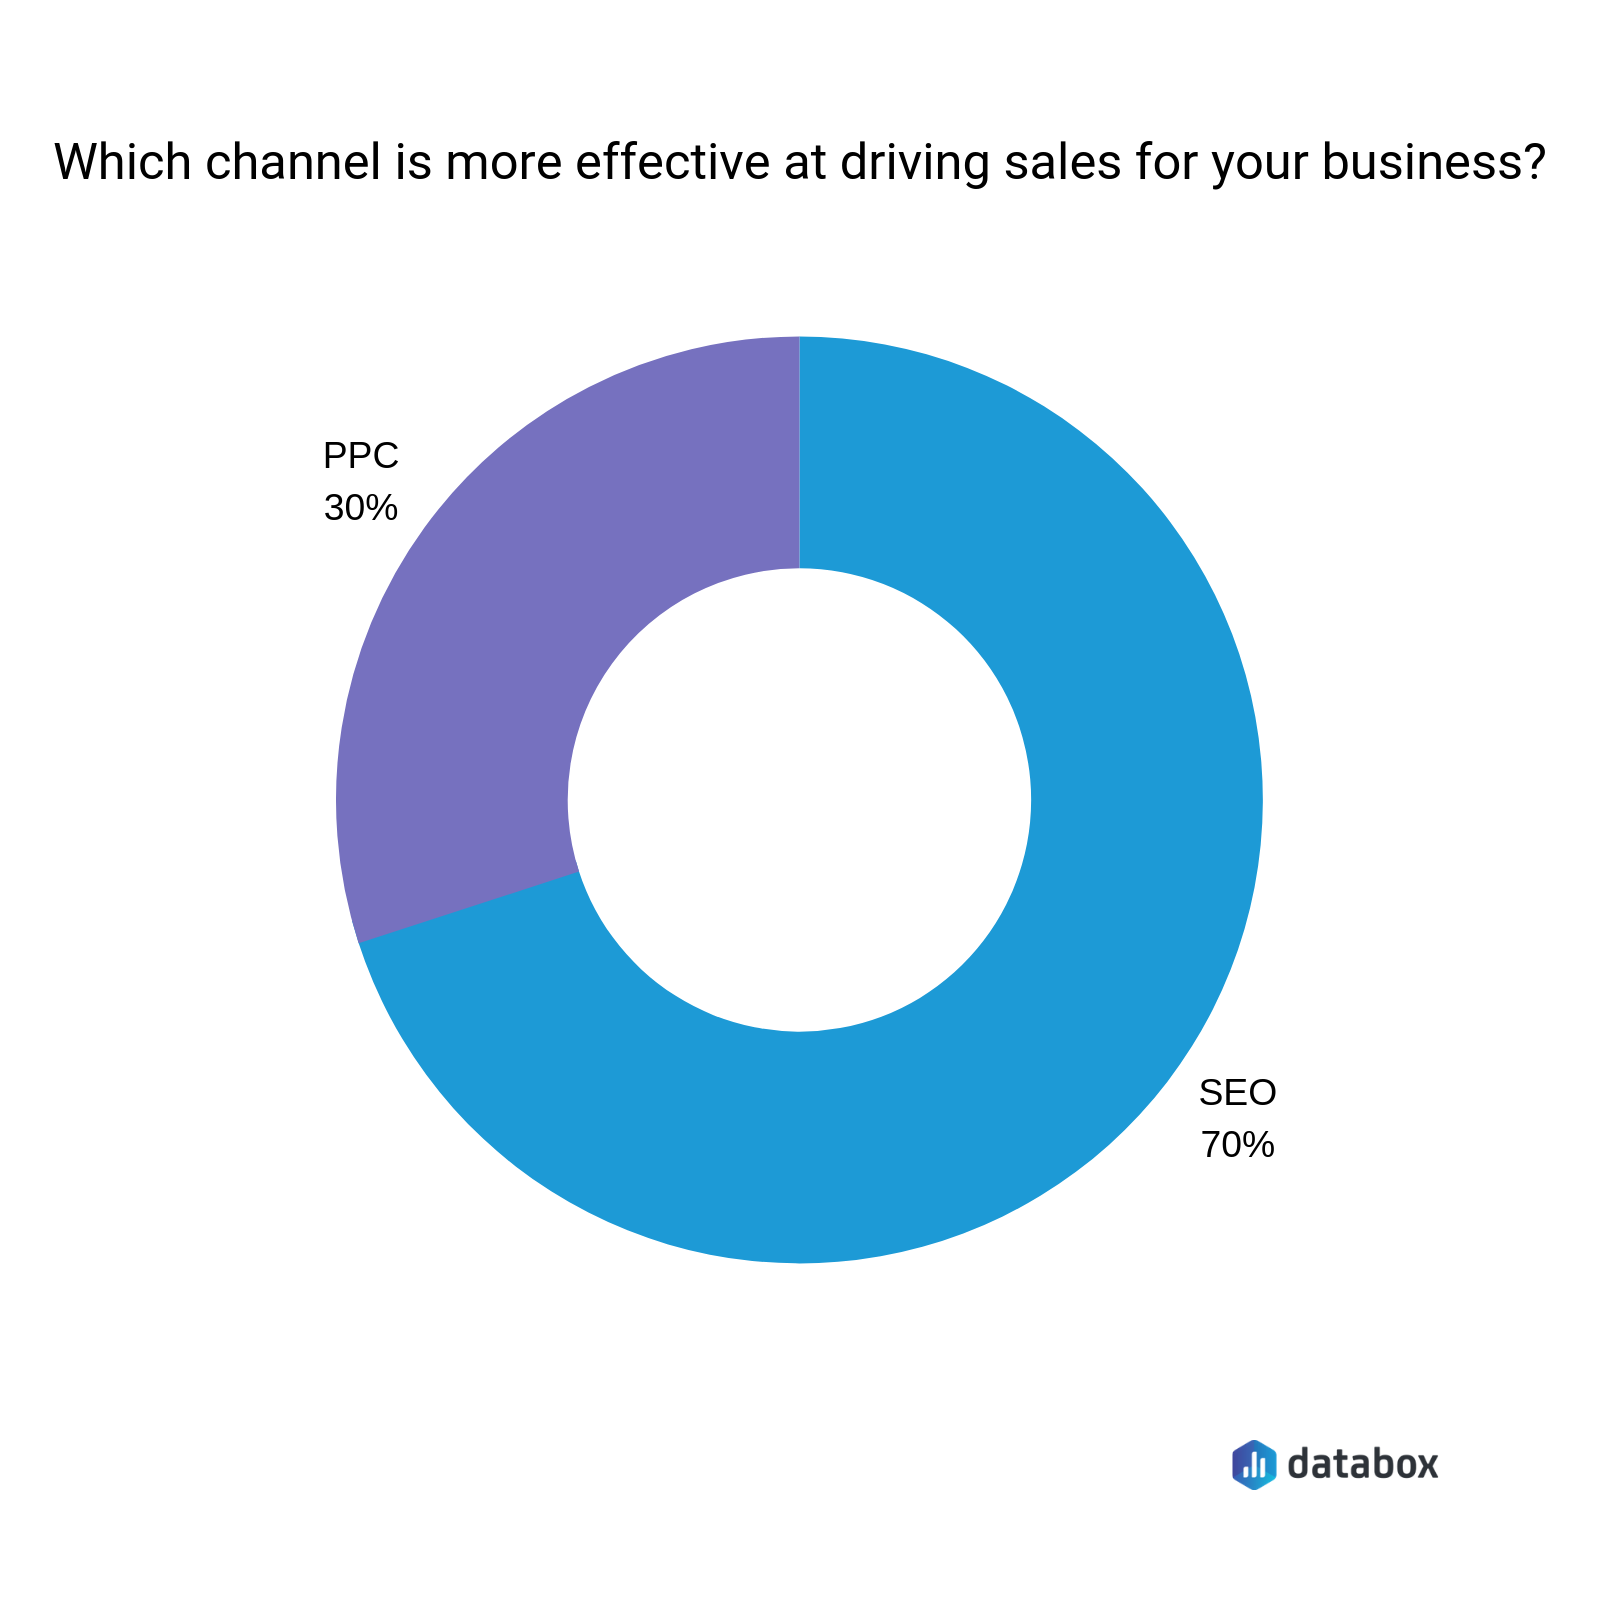 70% of marketers say that SEO is more effective than PPC